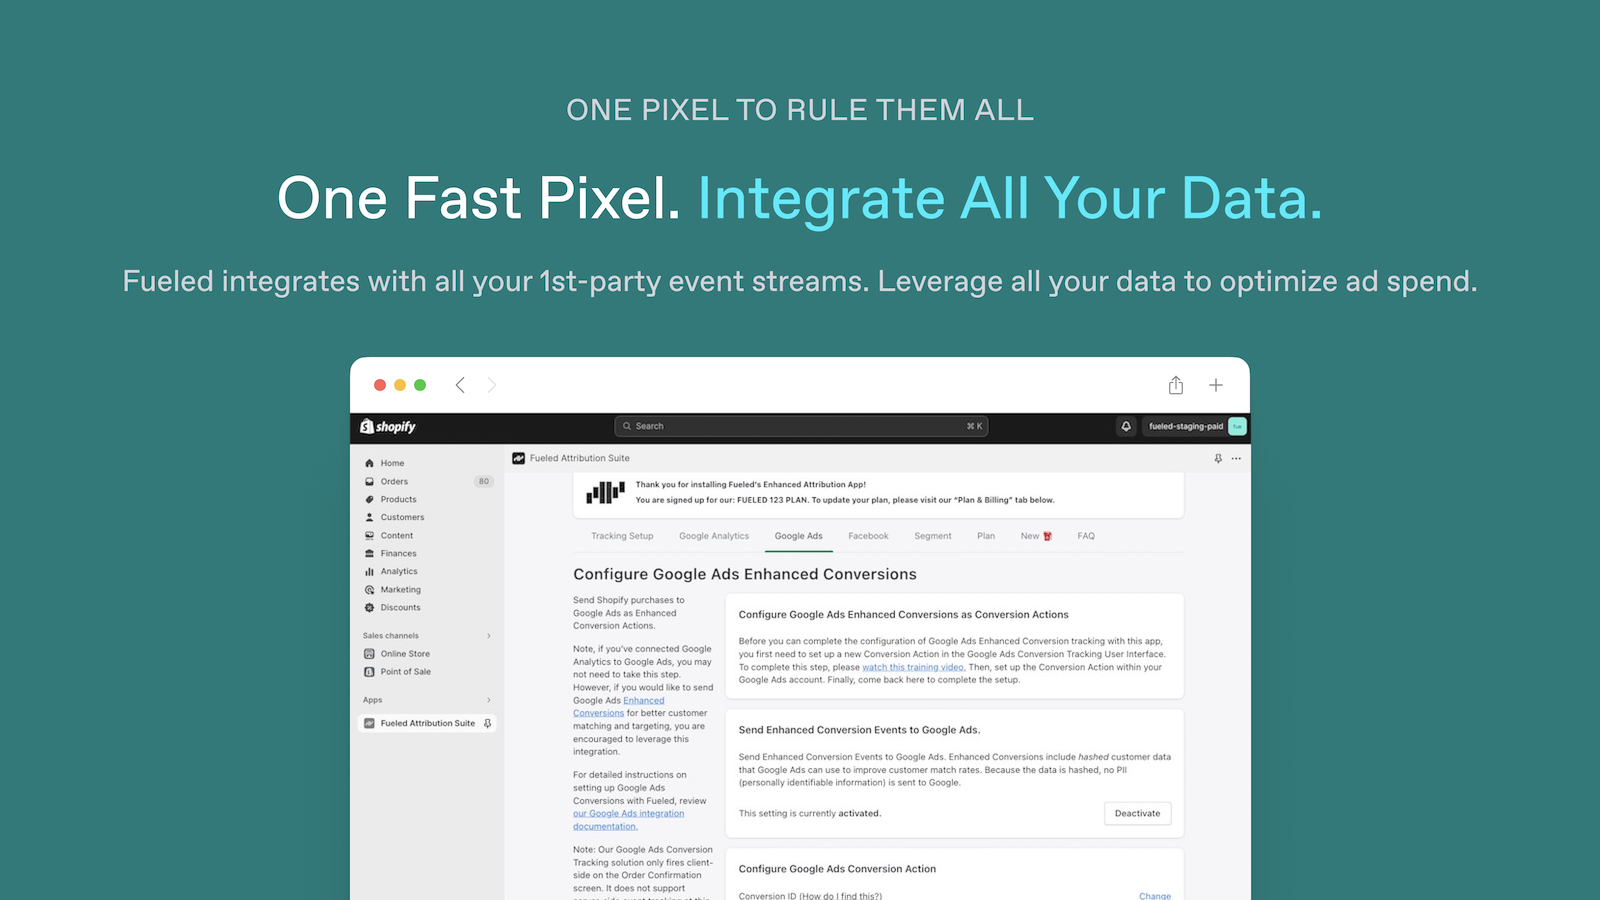 One Fast Pixel. Integrate All Your Data. Google, FB, Segment.